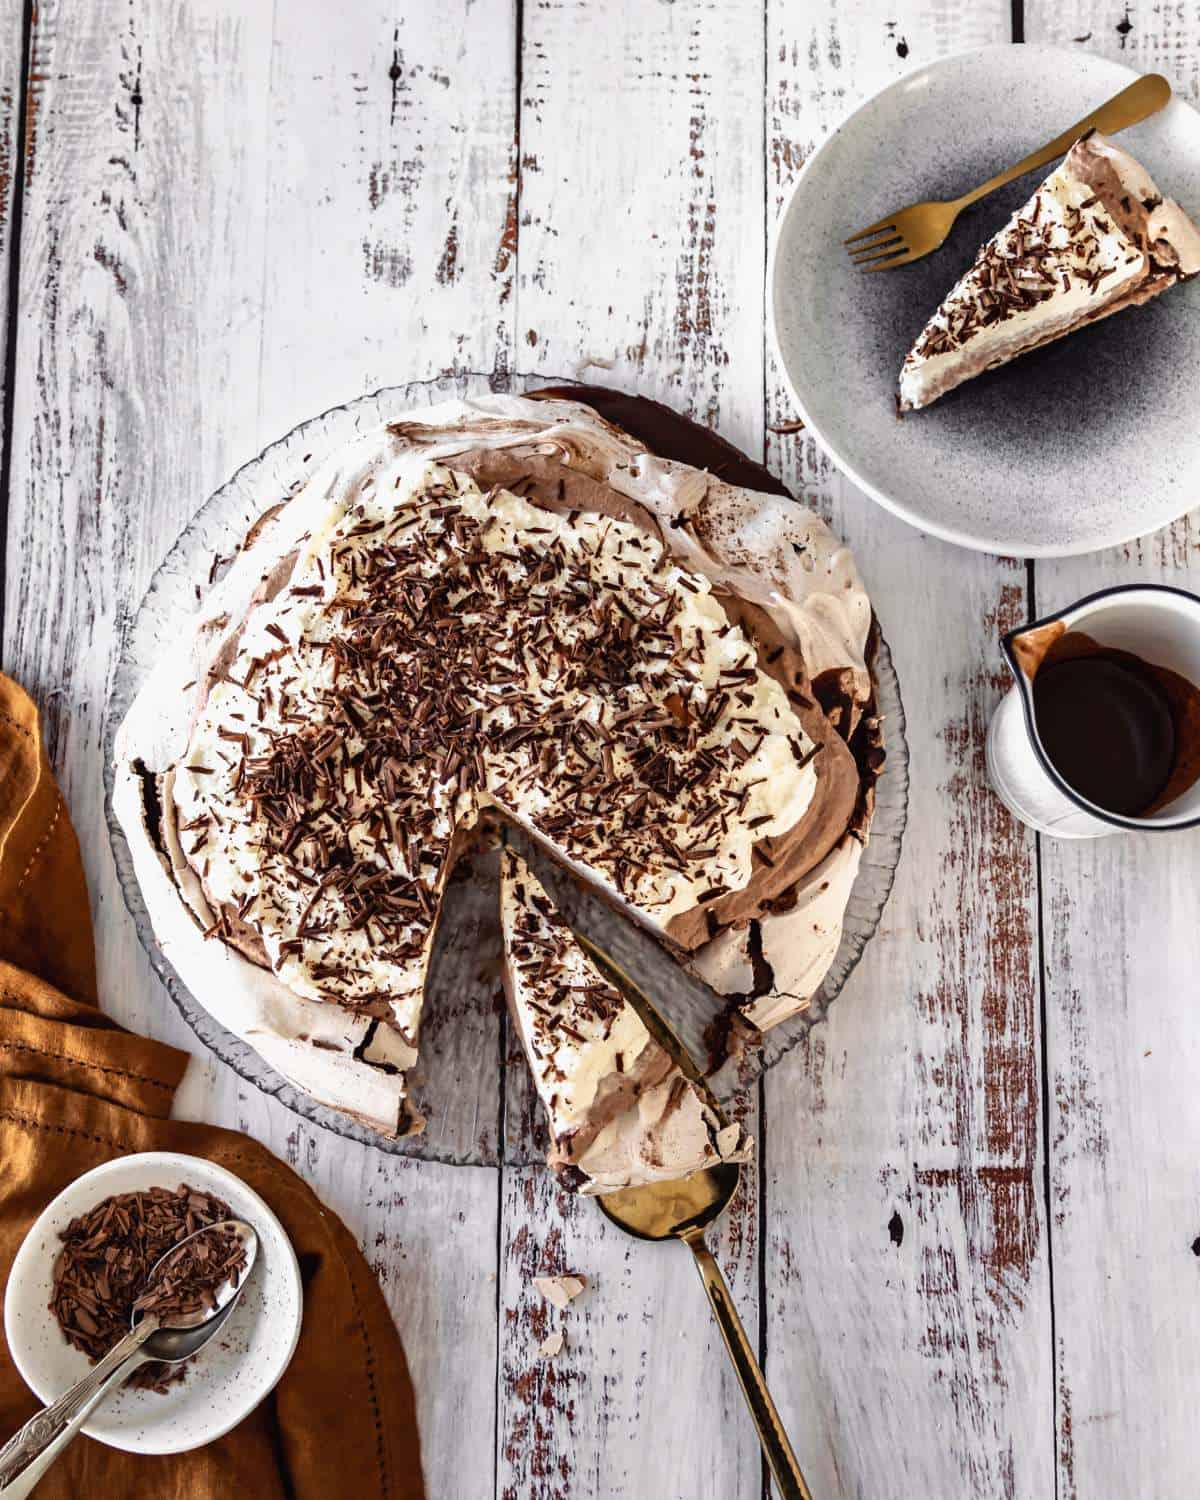 Cooked and assembled chocolate pavlova with a slice removed and served in a grey dessert bowl. Small jug of chocolate sauce and grated chocolate to the side